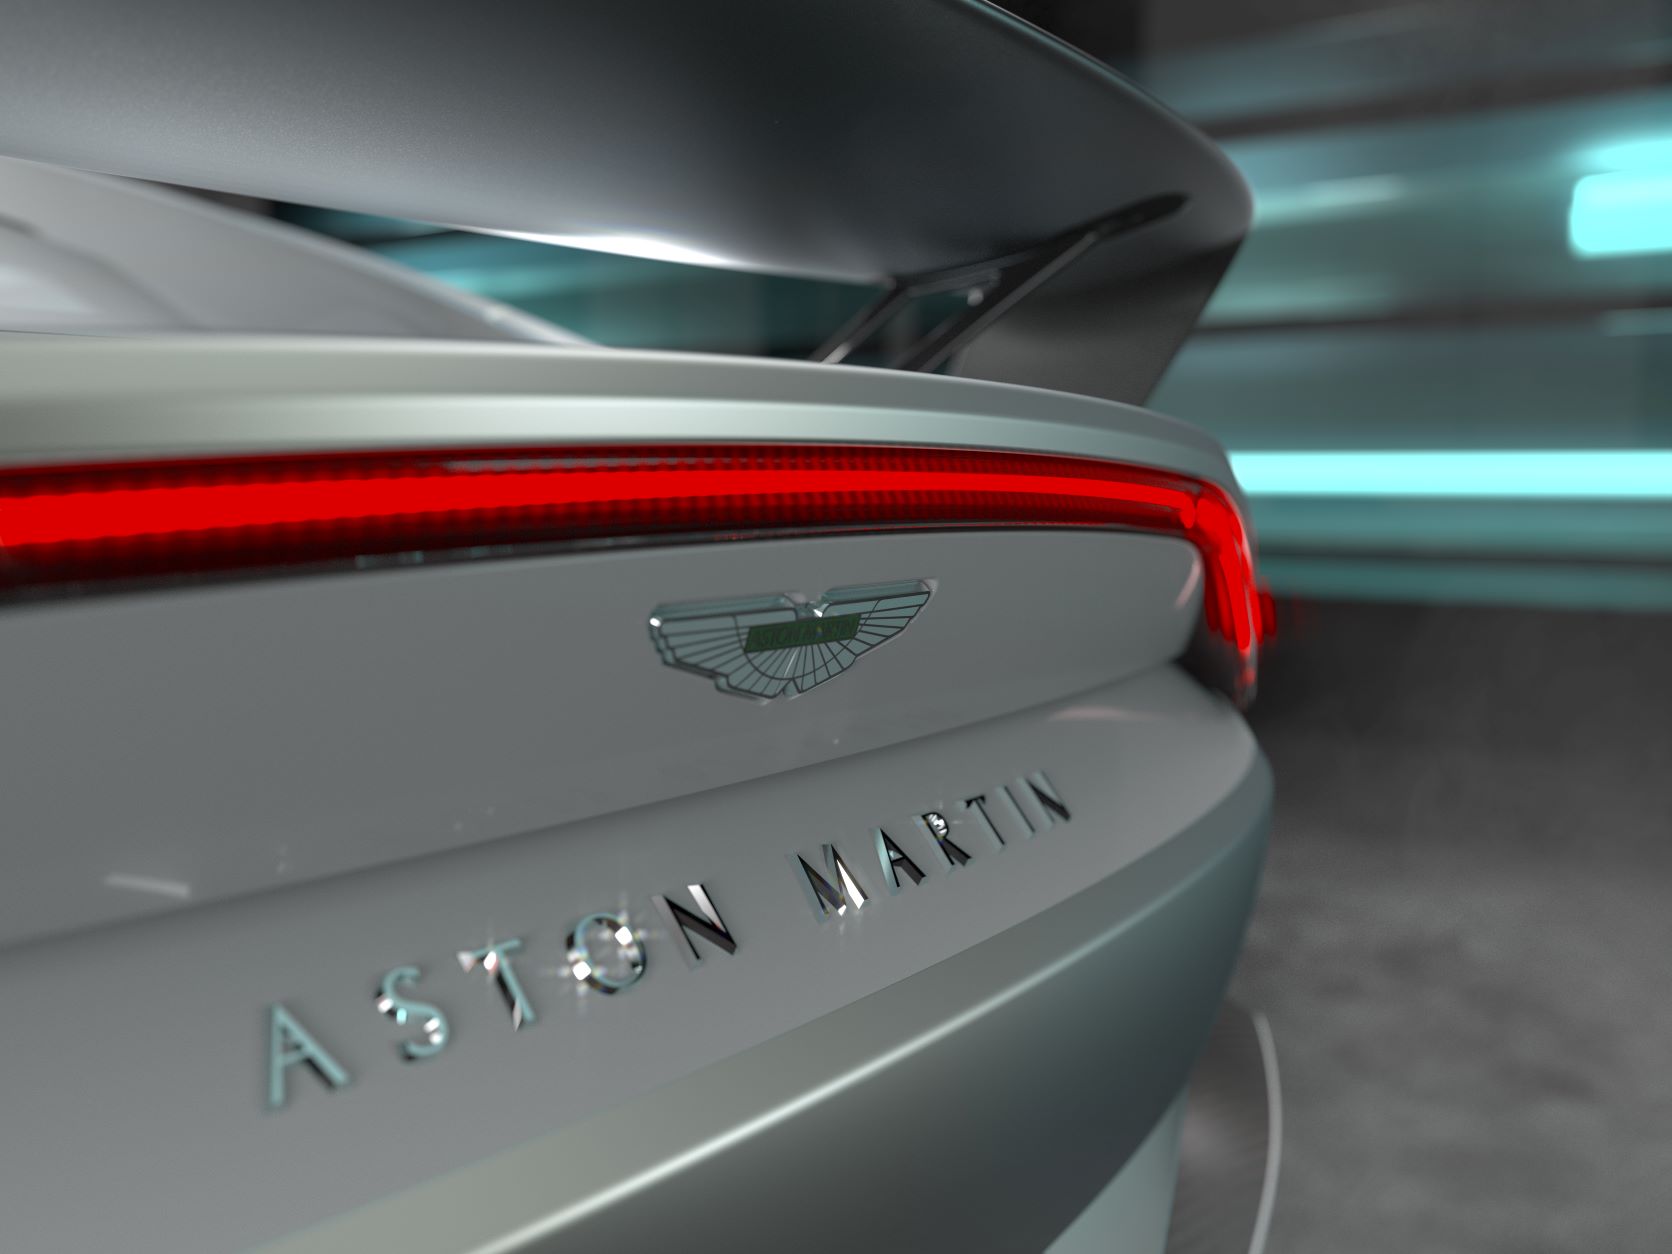 View of the badge on the new Aston Martin V12 Vantage